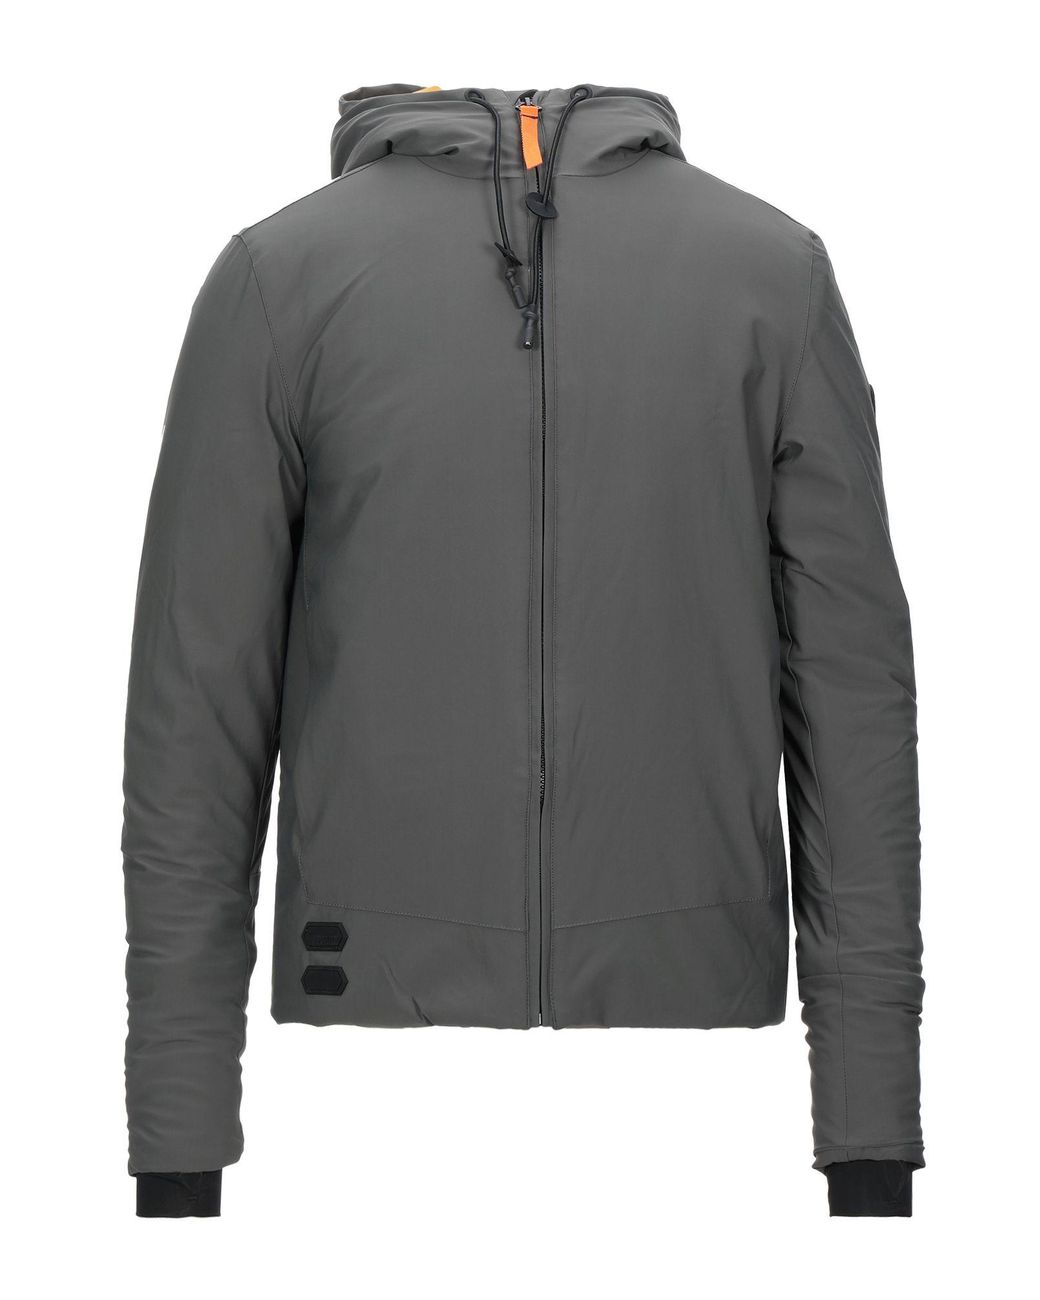 Gertrude + Gaston Synthetic Down Jacket in Lead (Gray) for Men - Lyst